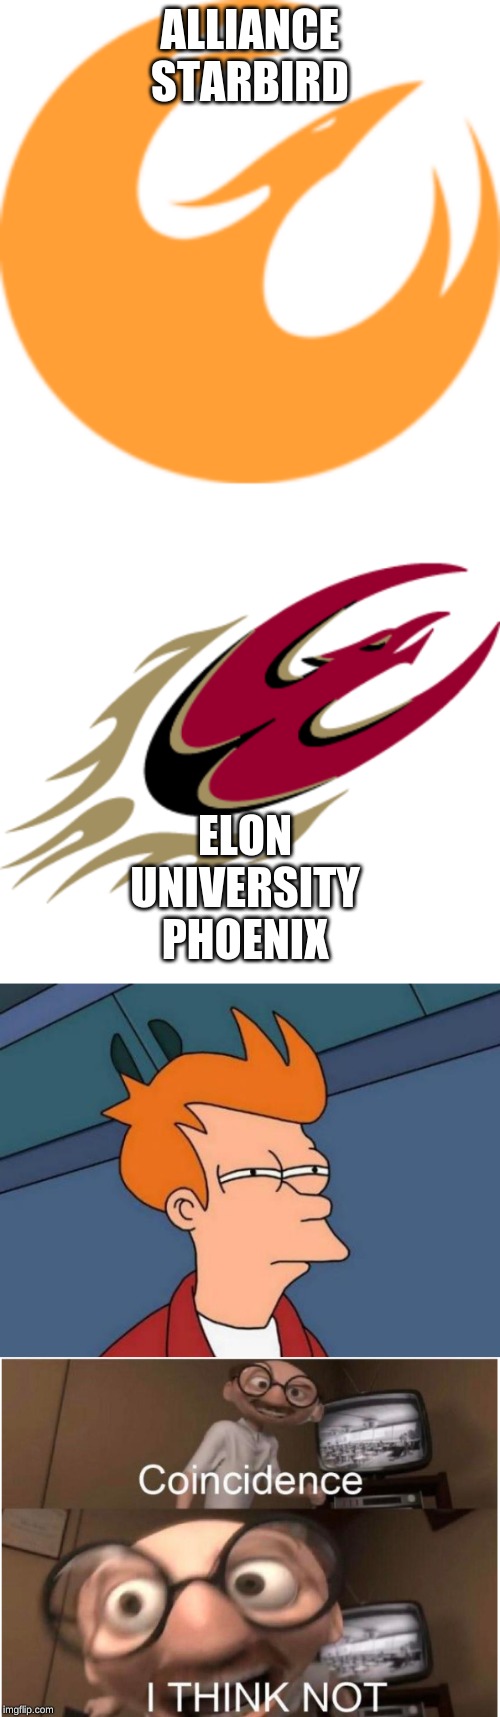 This is a coincidence between a university and Star Wars. | ALLIANCE STARBIRD; ELON UNIVERSITY PHOENIX | image tagged in memes,futurama fry,coincidence i think not | made w/ Imgflip meme maker